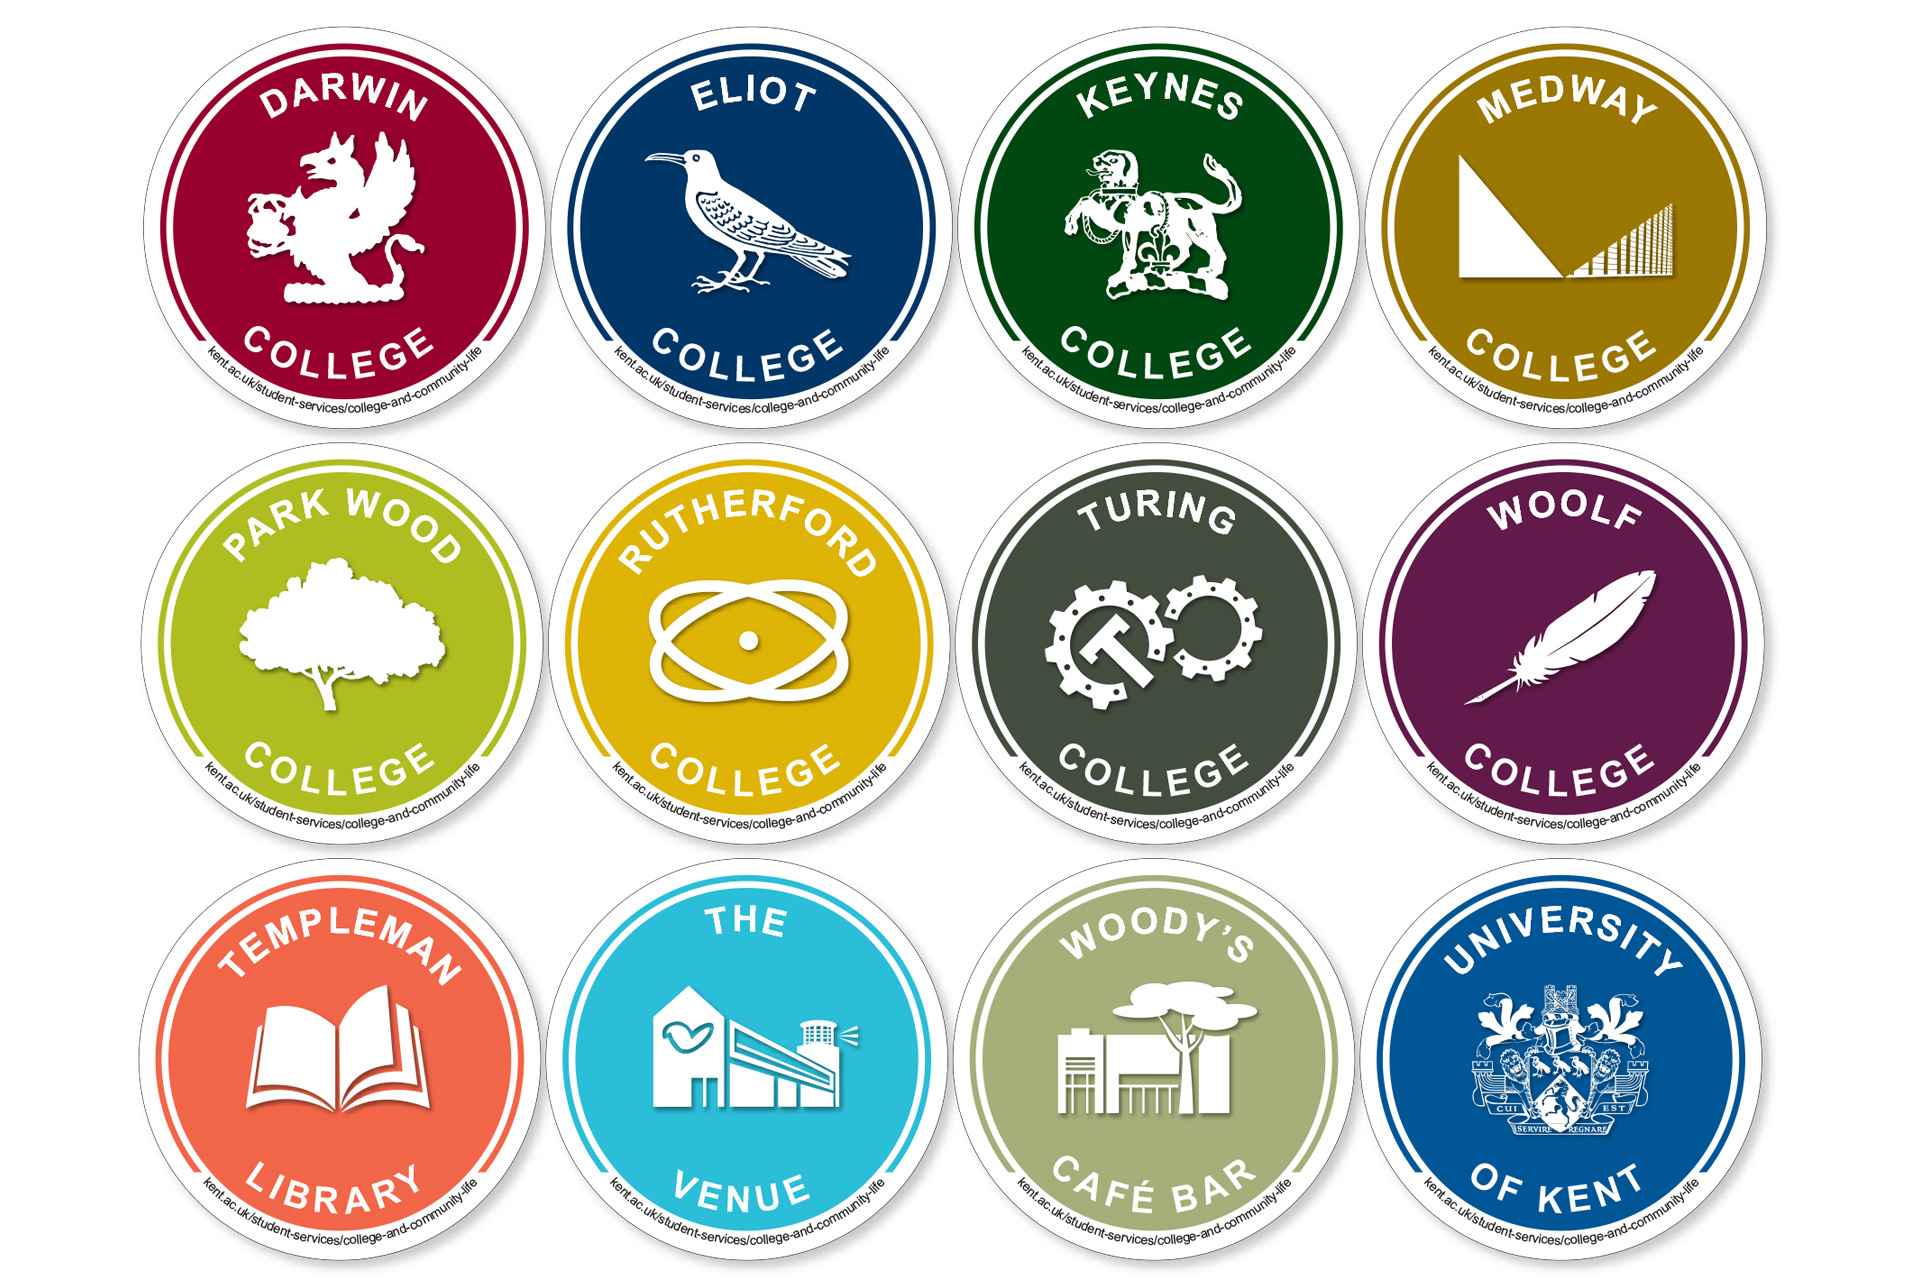 All 12 College (and other) Coasters